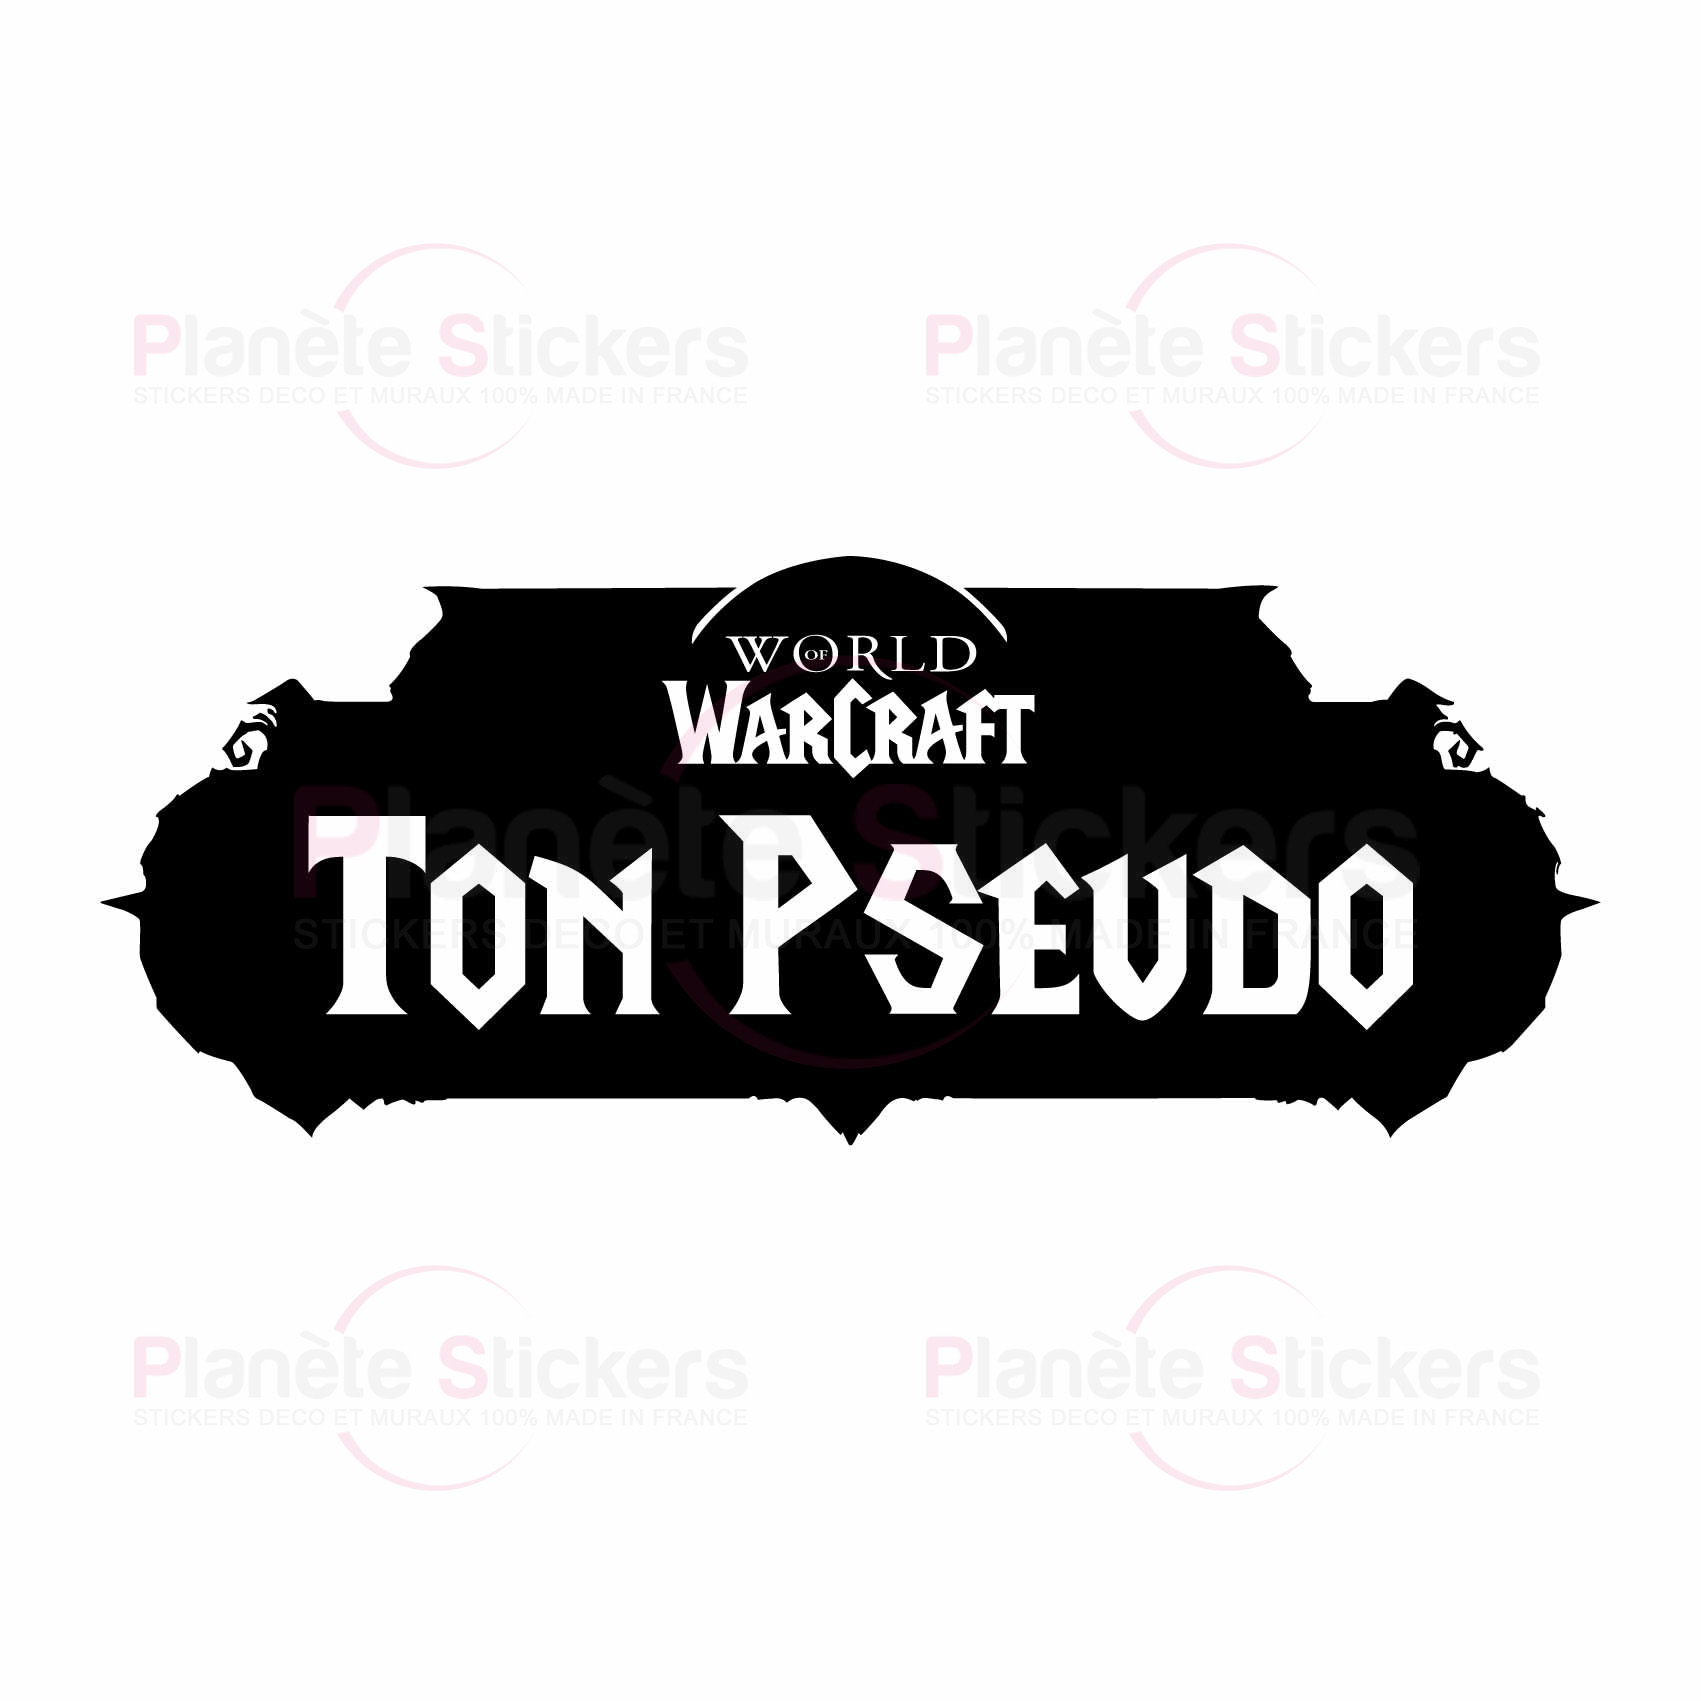 stickers-pseudo-personnalisé-wow-ref22wow-stickers-muraux-world-of-warcraft-autocollant-mural-jeux-video-sticker-gamer-deco-gaming-salon-chambre-(2)